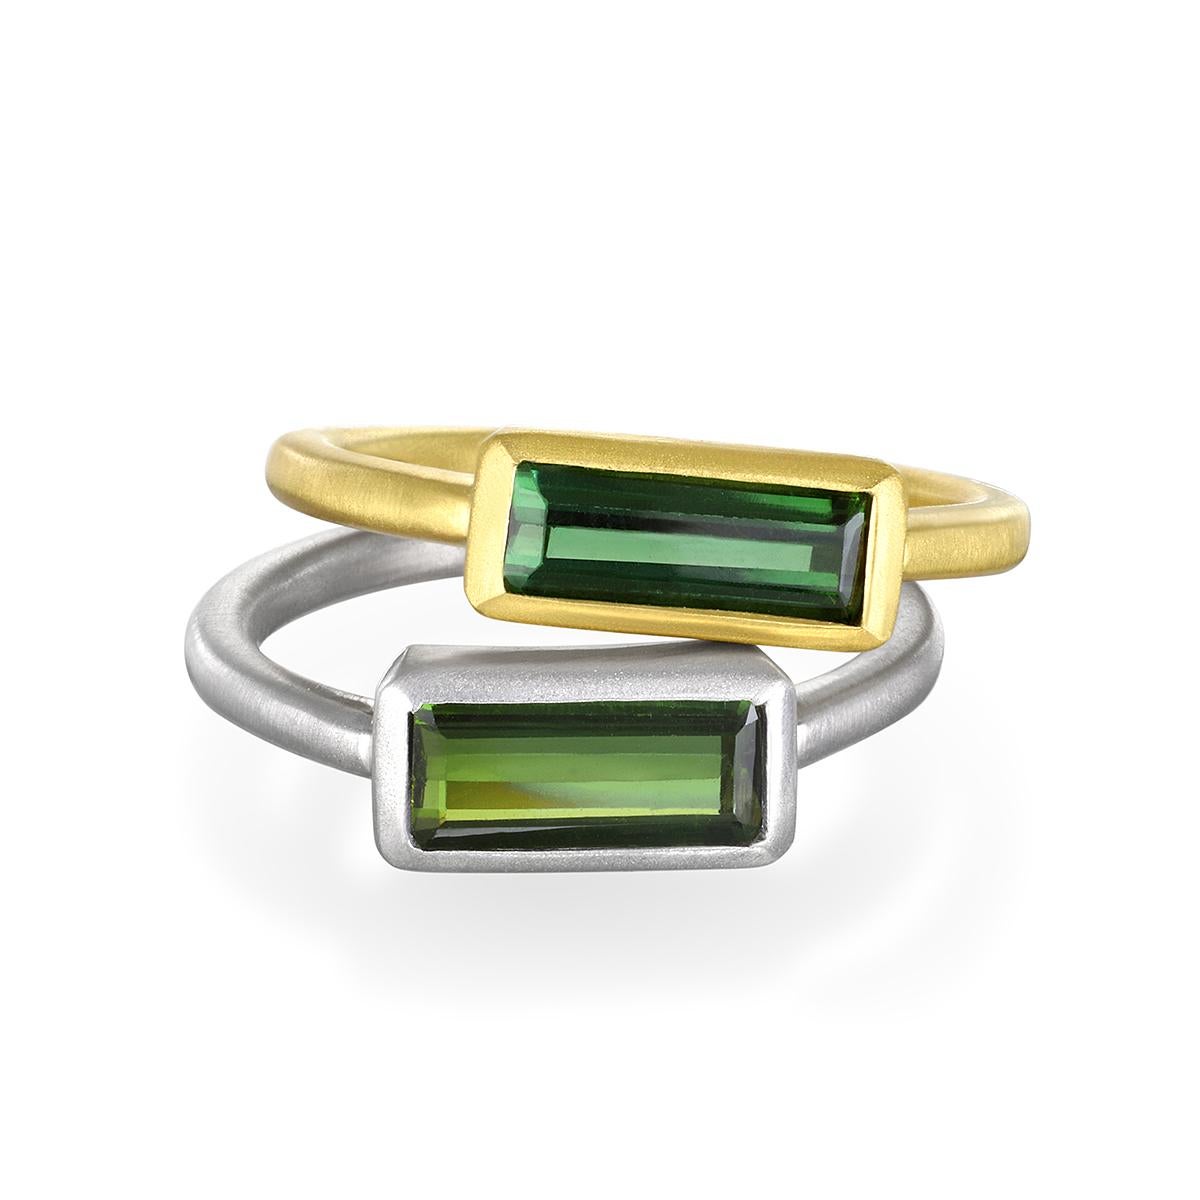 One of a kind - Faye Kim's signature 18K White Gold Green Tourmaline Bezel Baguette Ring, with its matte finish, is beautiful worn alone or stacked with other rings. It offers both a contemporary and timeless elegance and feel, and is available in